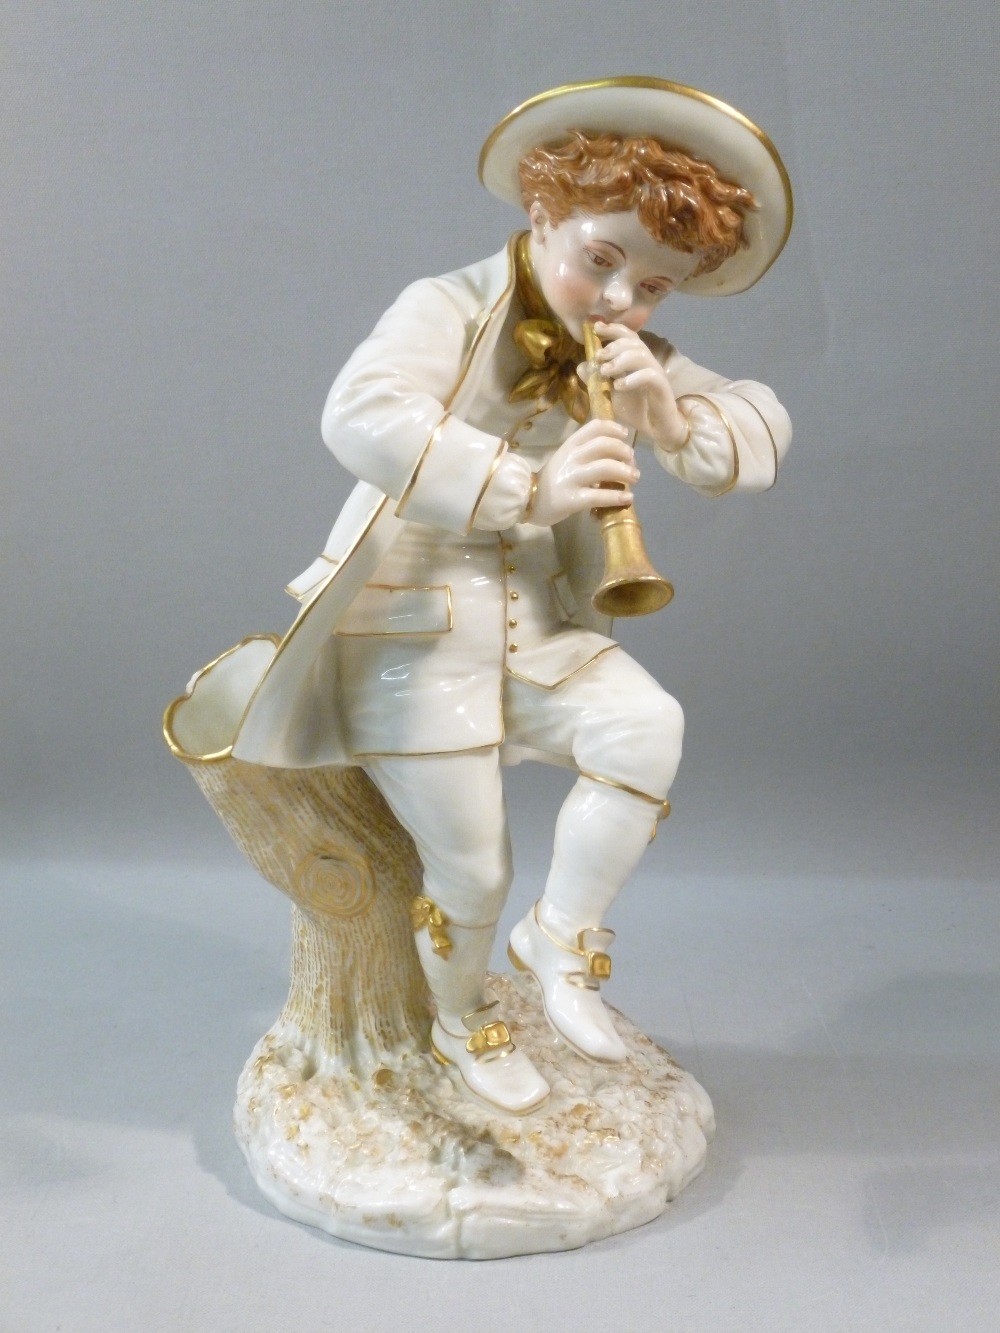 VICTORIAN HADLEY WORCESTER PORCELAIN FIGURE OF A YOUNG MAN PLAYING A FLUTE, STANDING AGAINST A